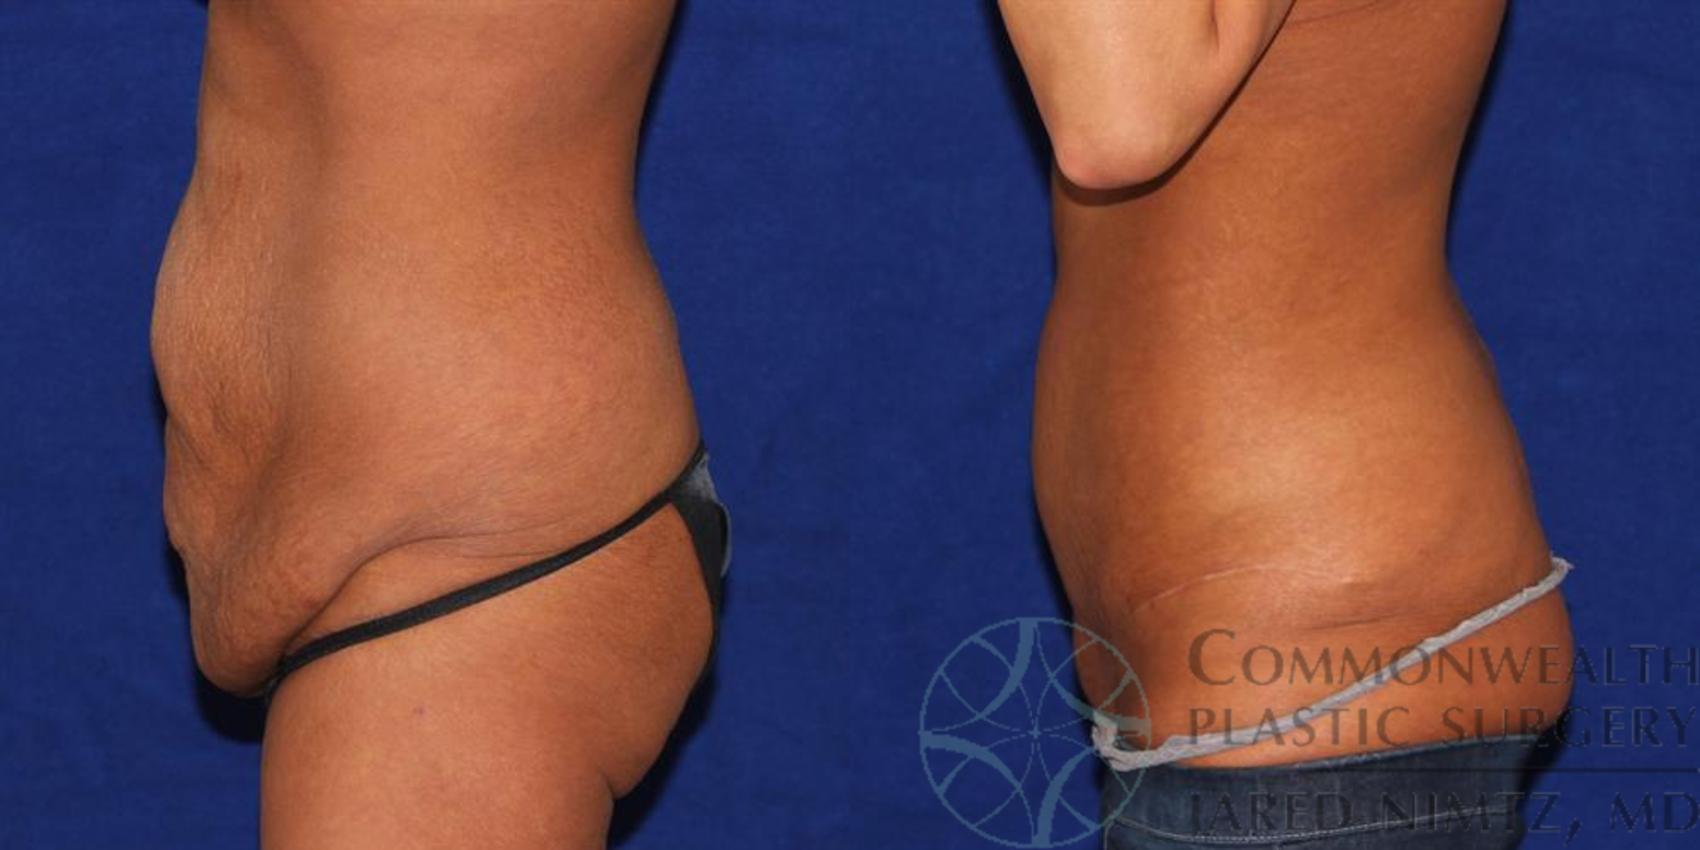 Liposuction vs. Tummy Tuck: What's the Difference?